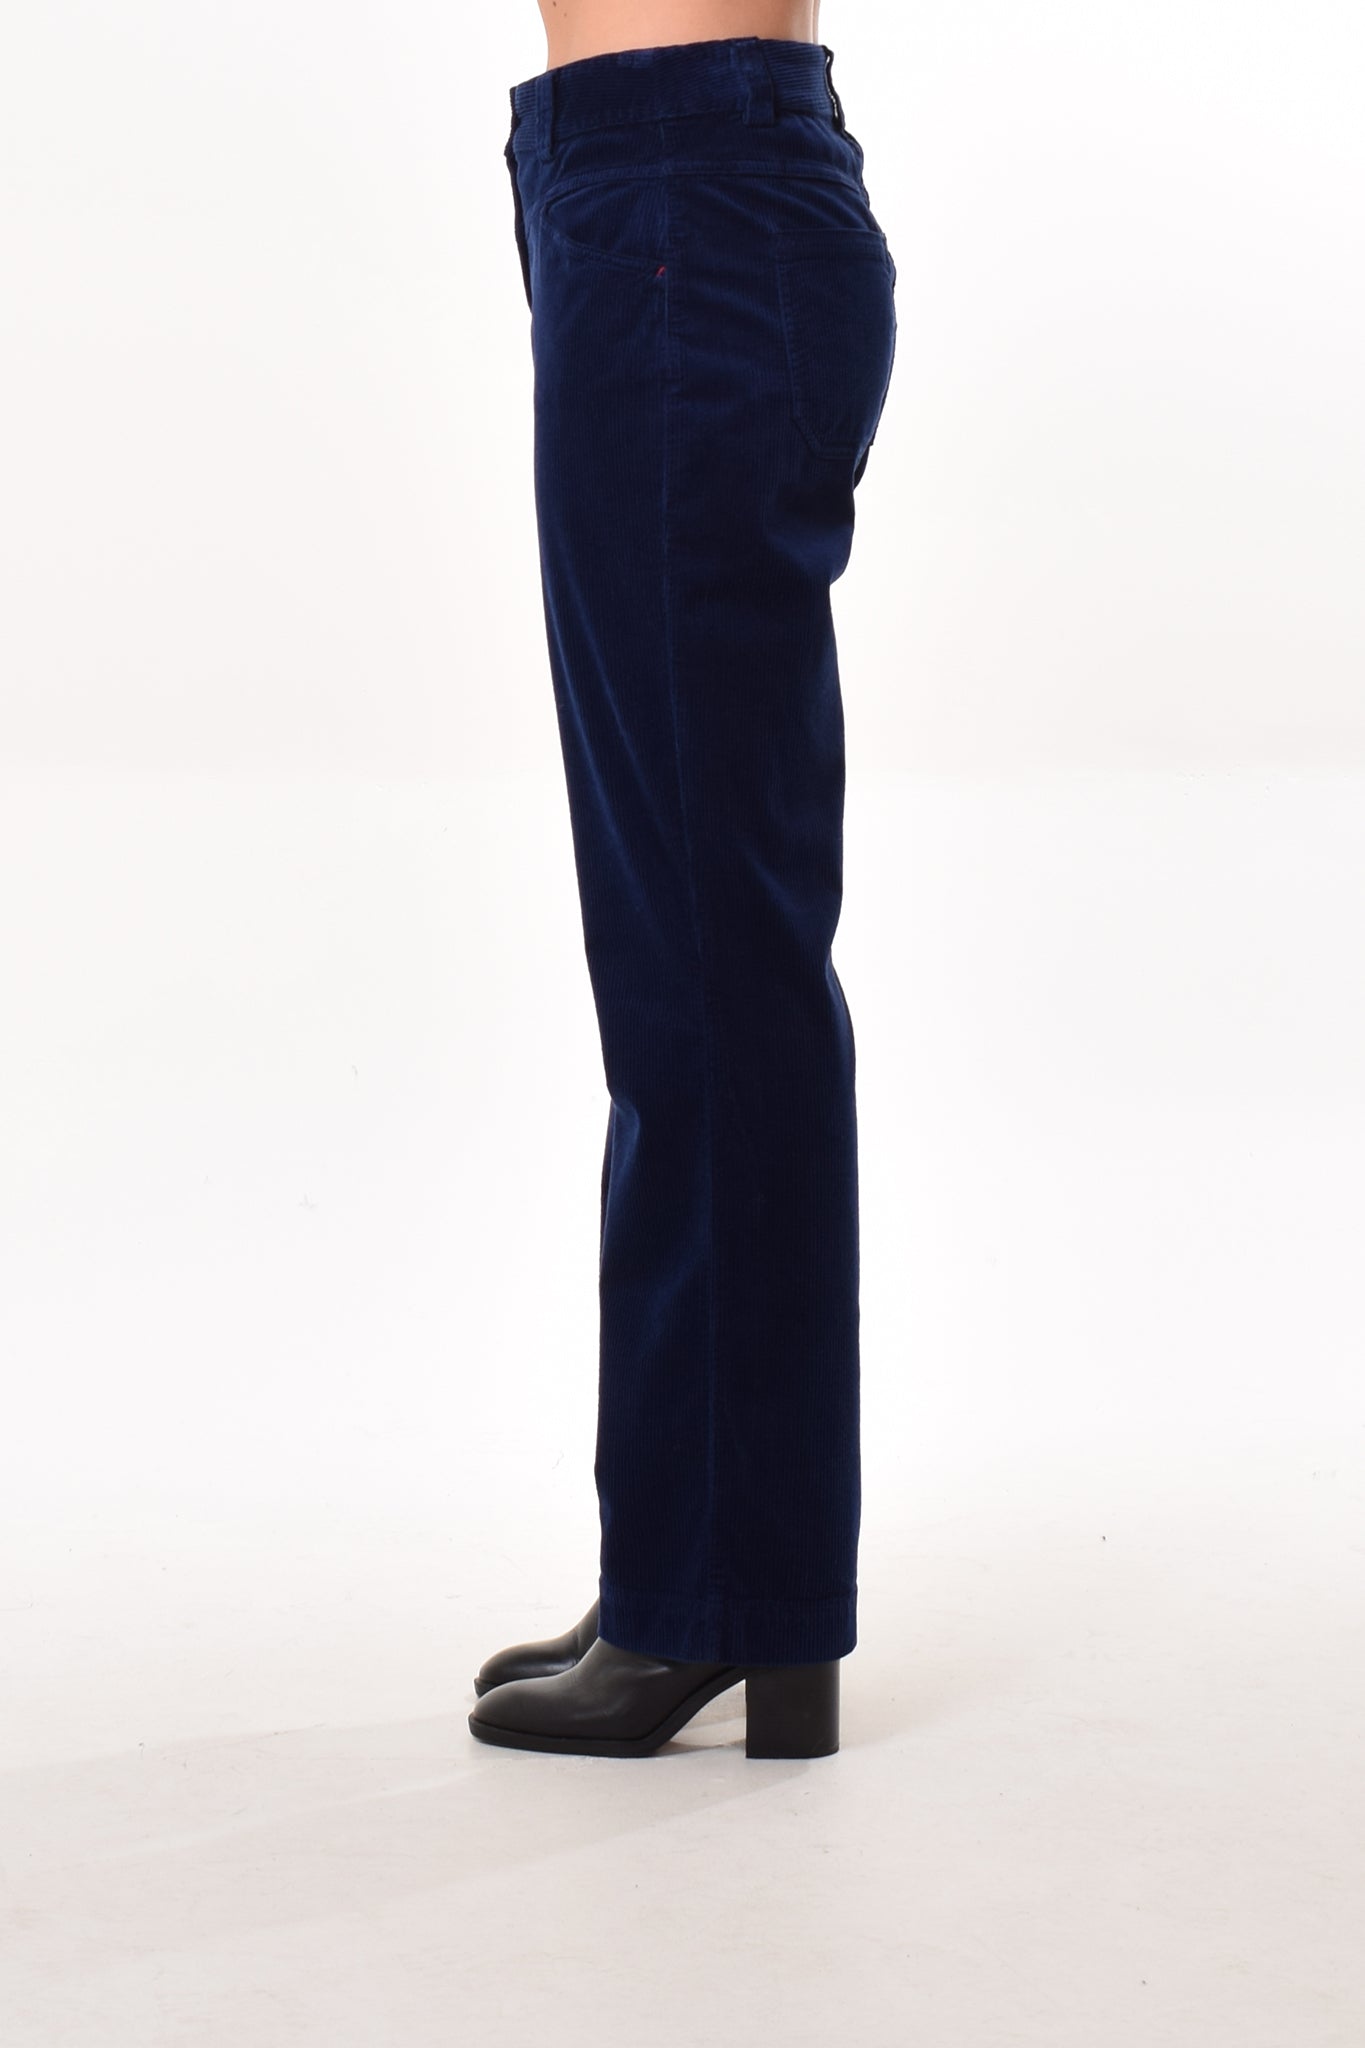 City trousers in Midnight (big cotton corduroy)